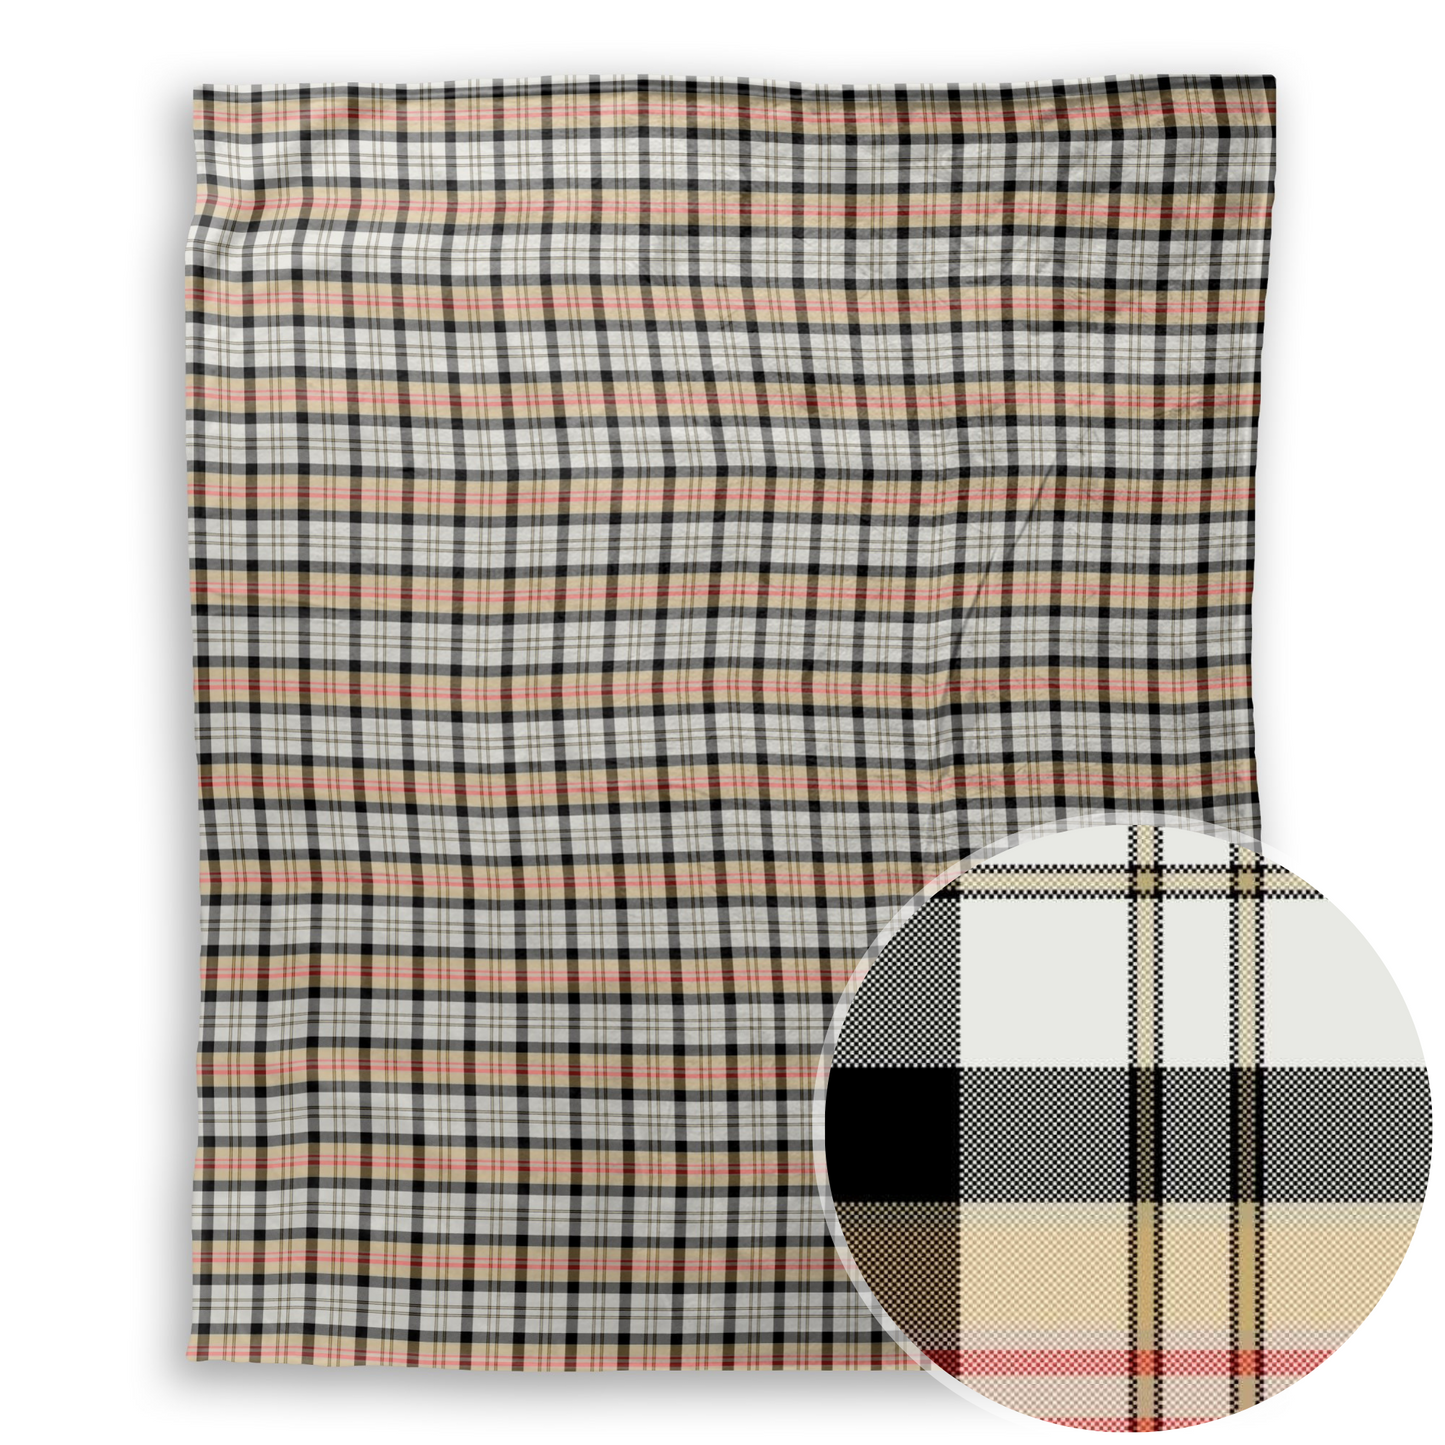 Silver and Gold Plaid Throw Blanket